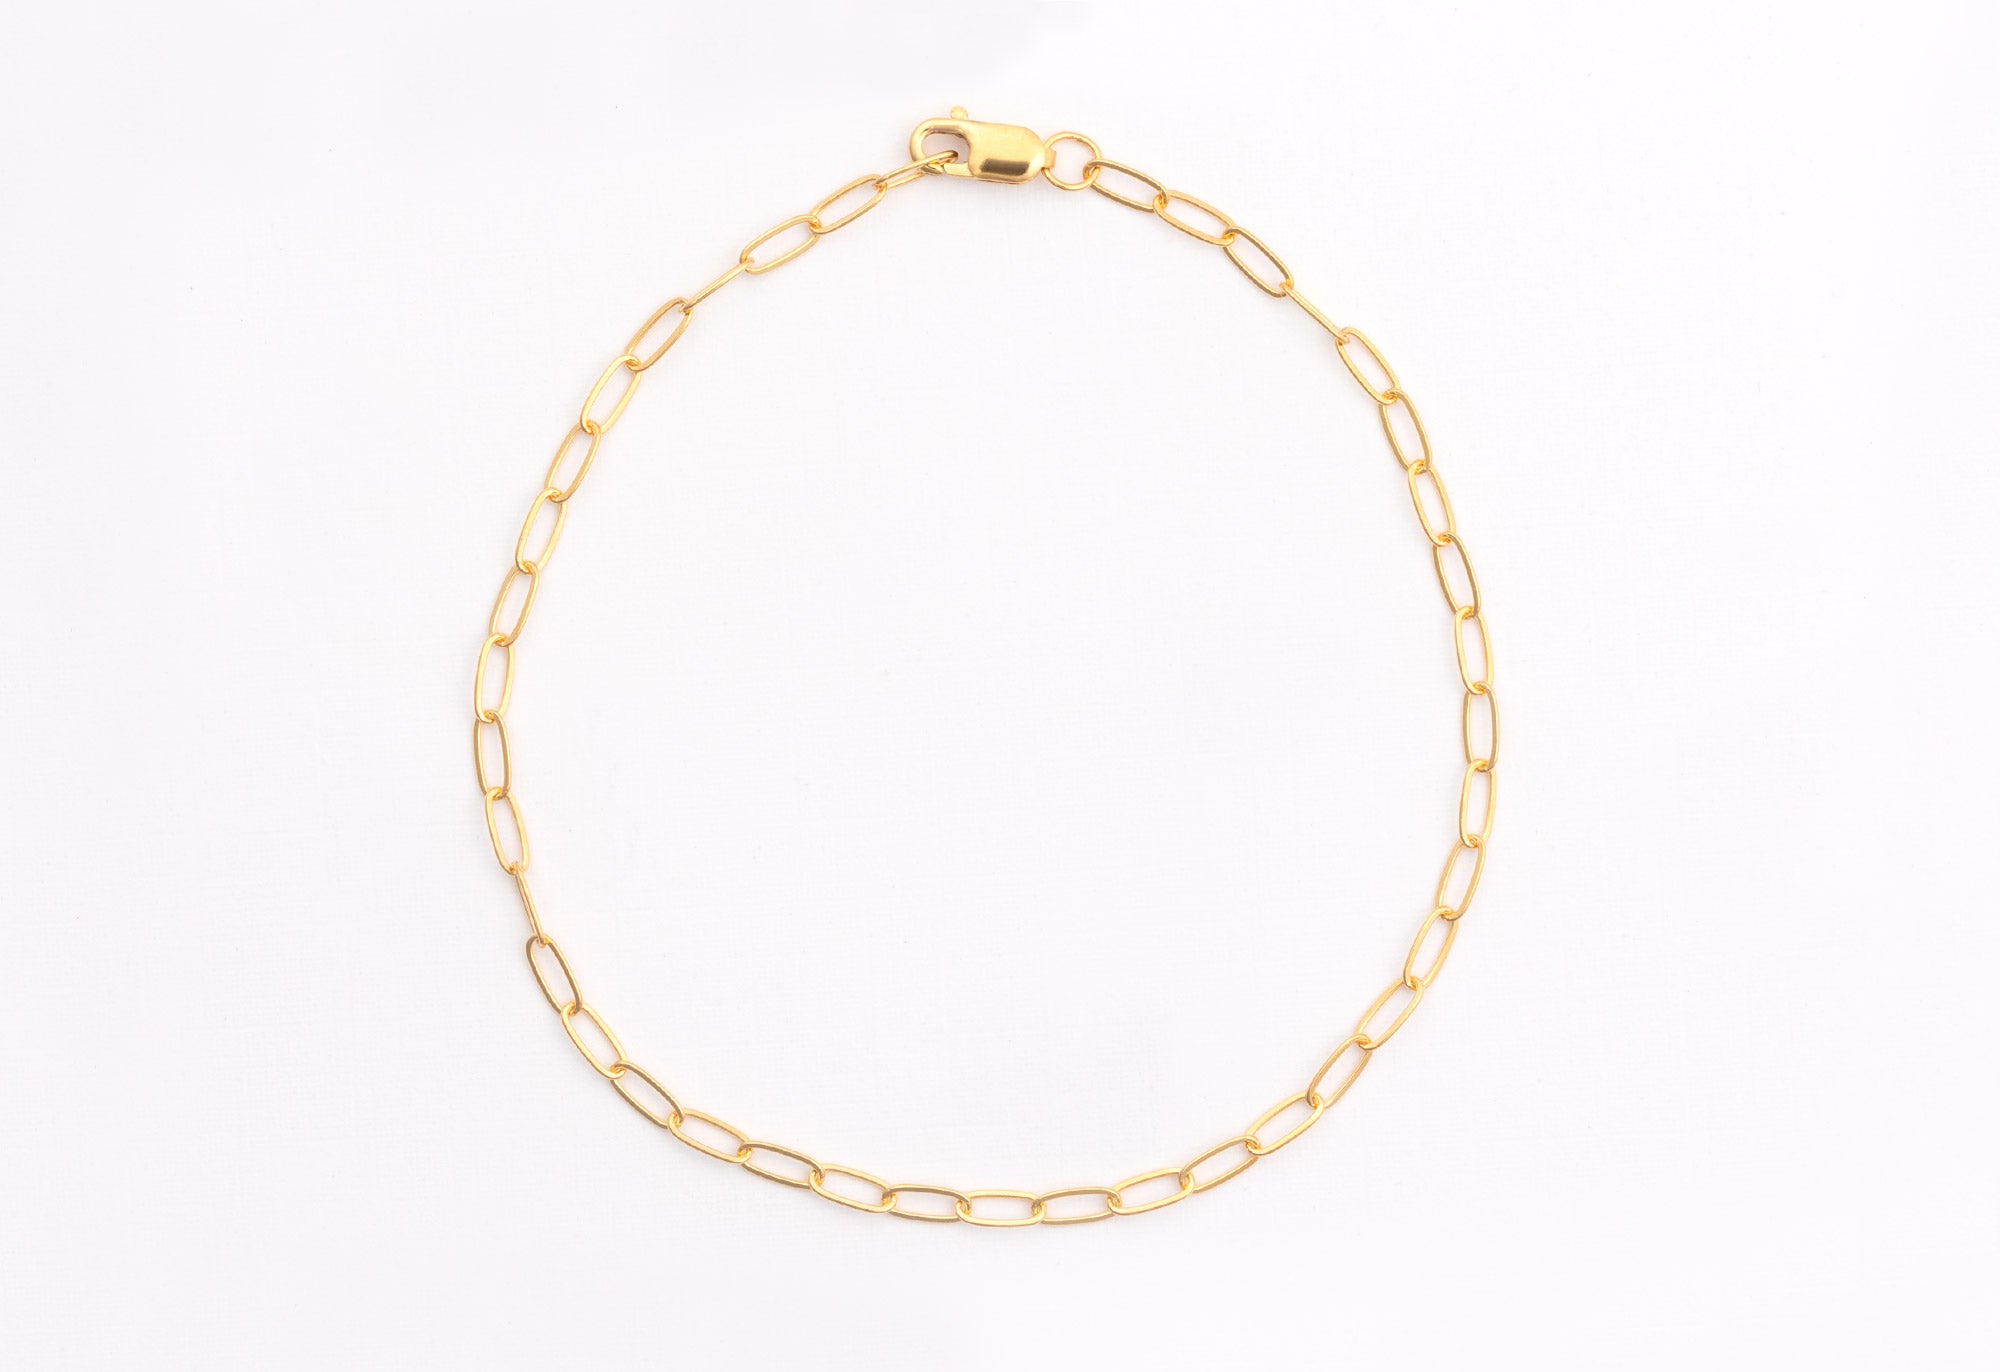 Yellow Gold The Drawn Cable Chain Charm Bracelet on White Background